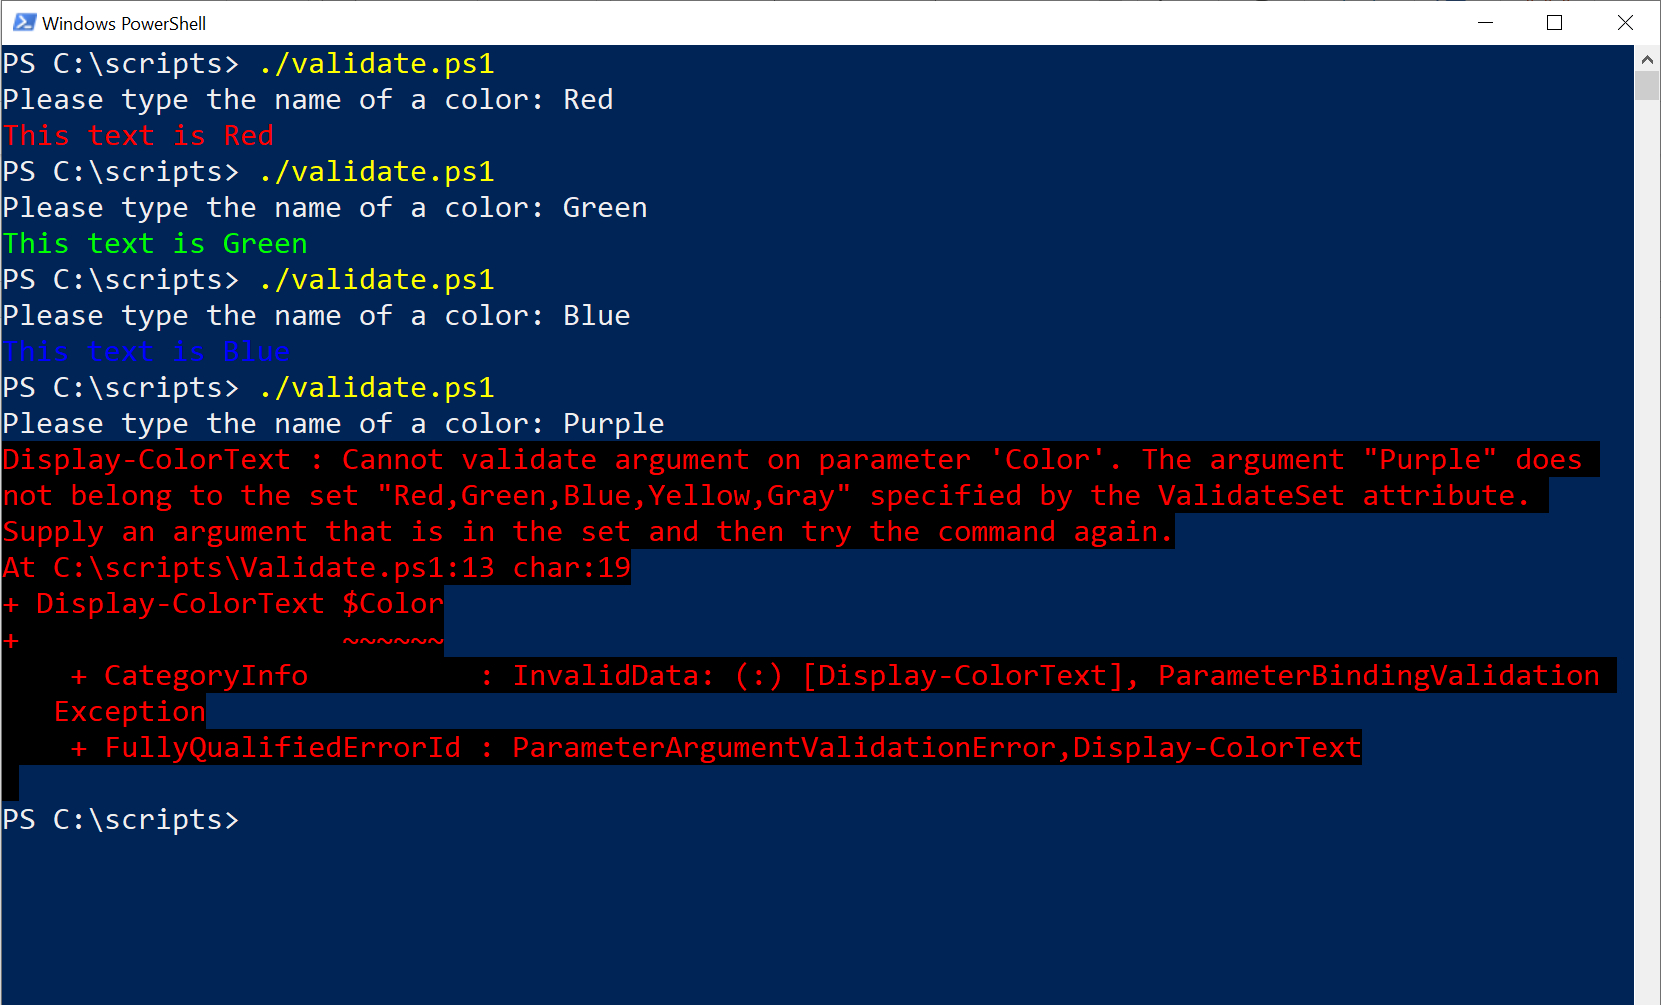 PowerShell script shows a long error message when the user enters an invalid color